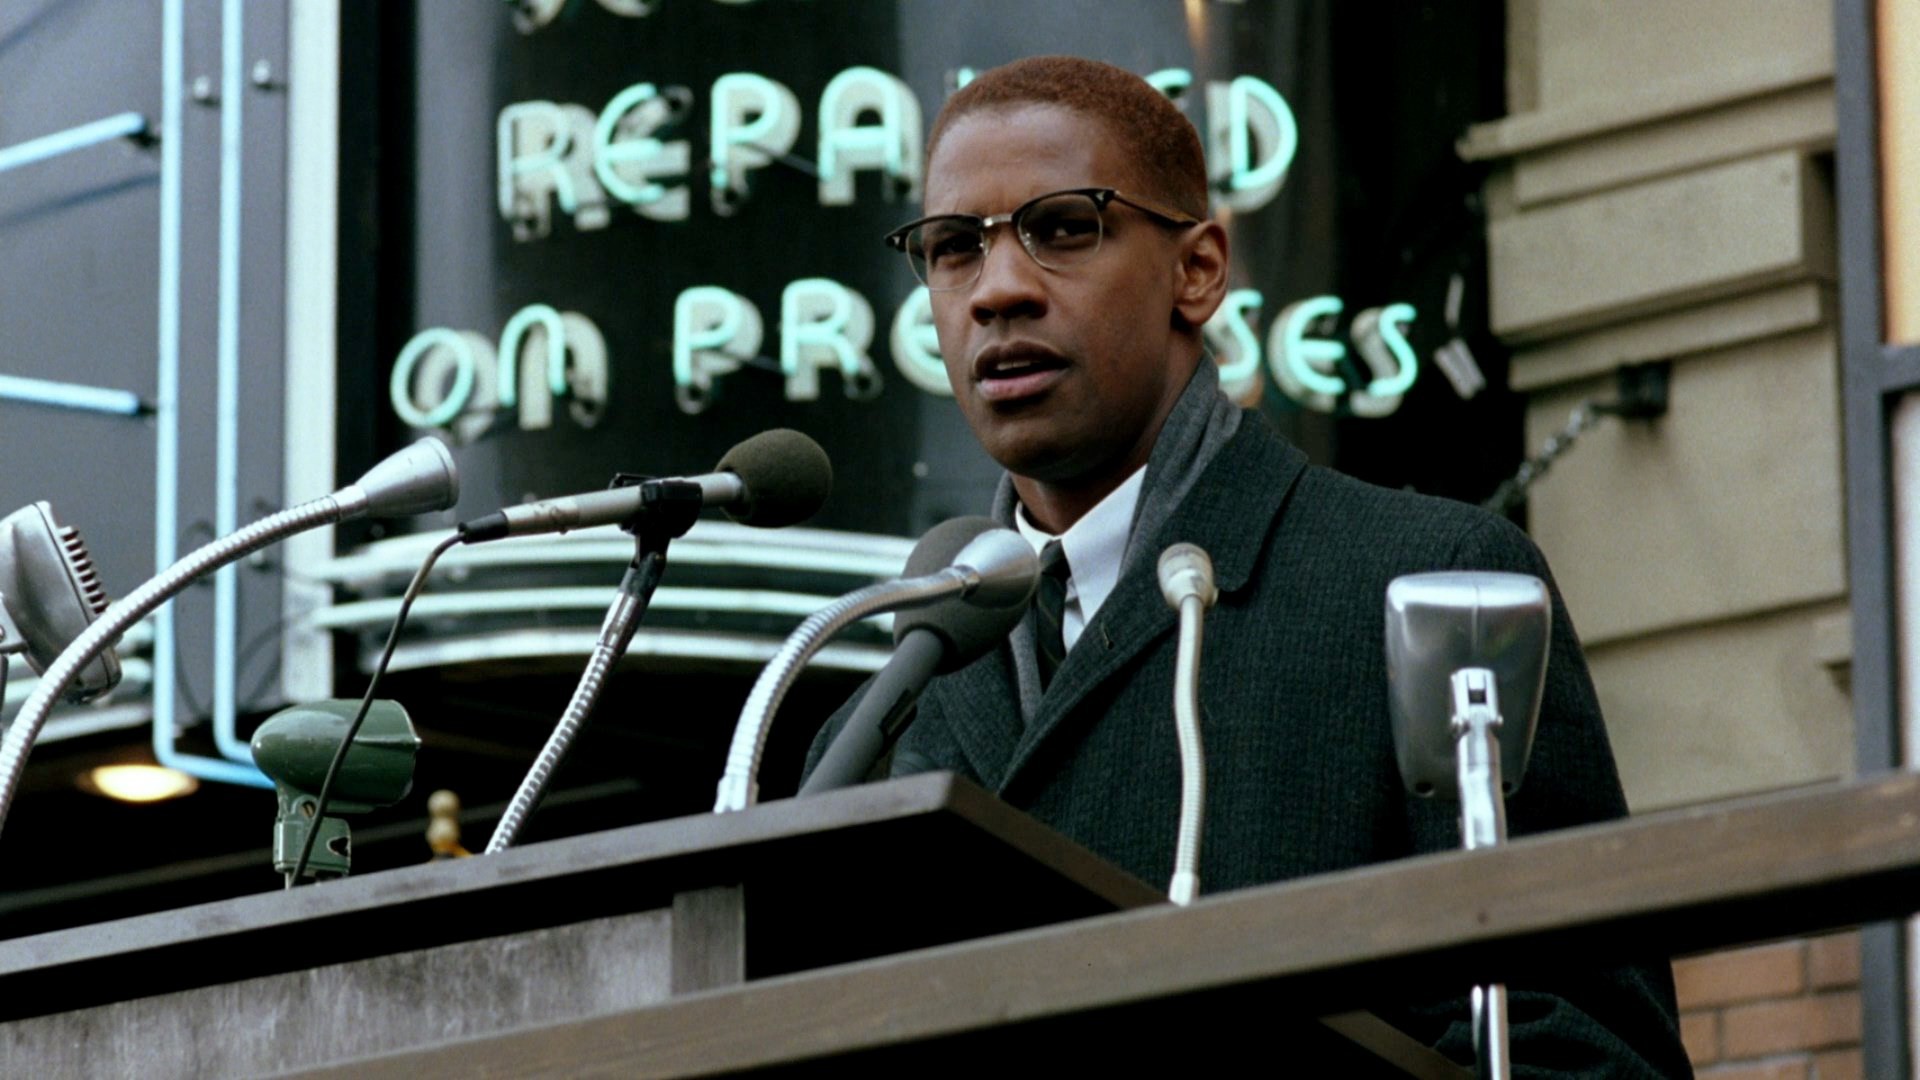 1920x1080 malcolm x backround - Full HD Backgrounds,  (281 kB)